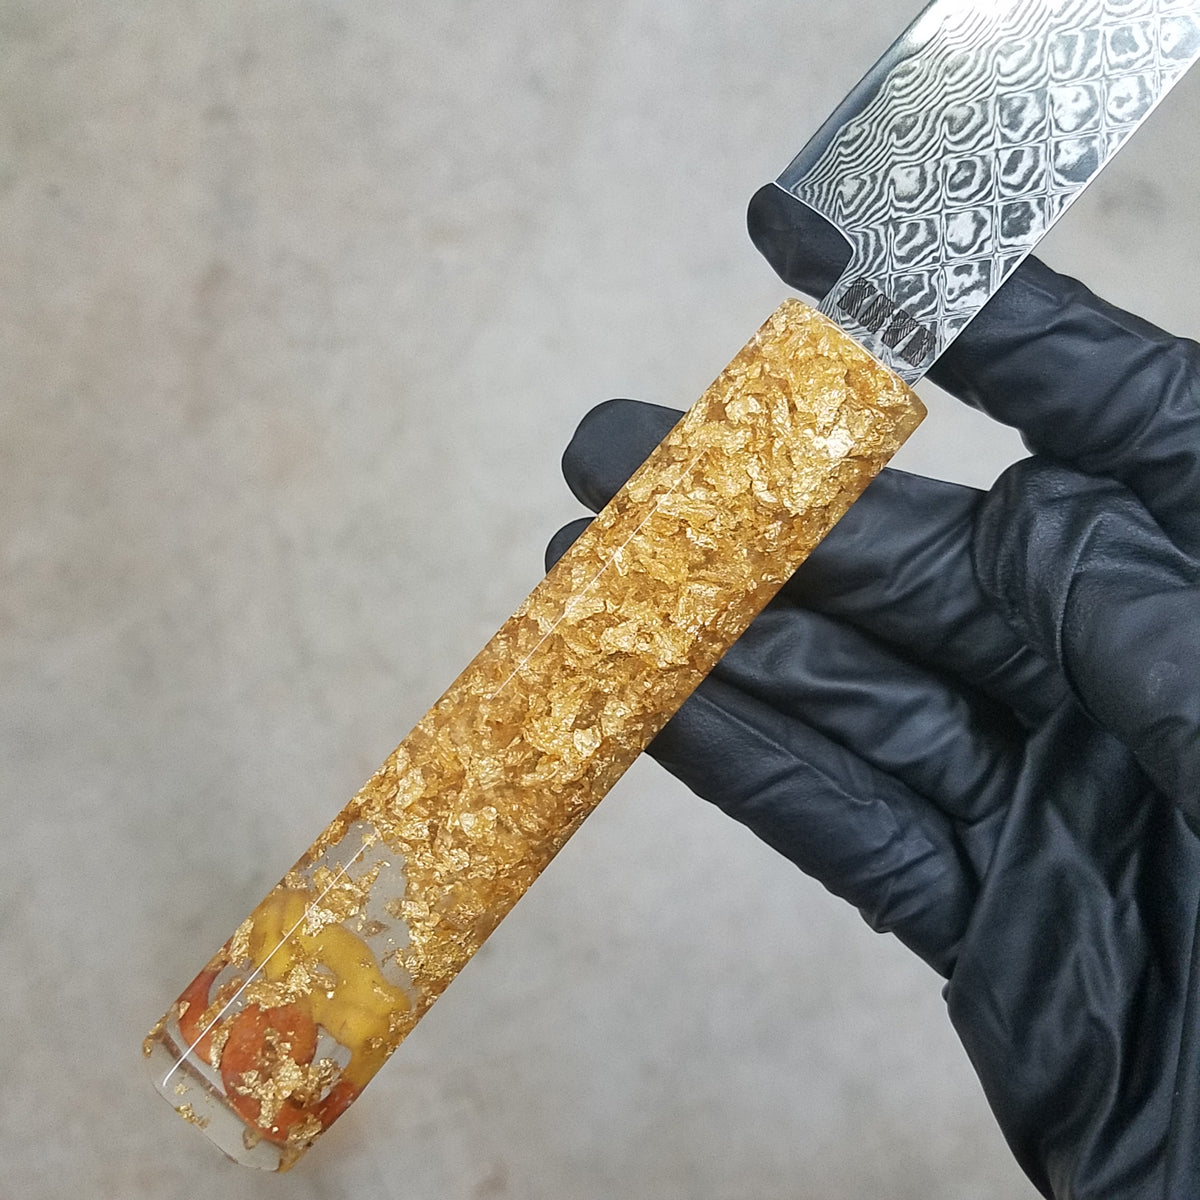 Goldy Knots - 6in (150mm) Damascus Petty Culinary Knife